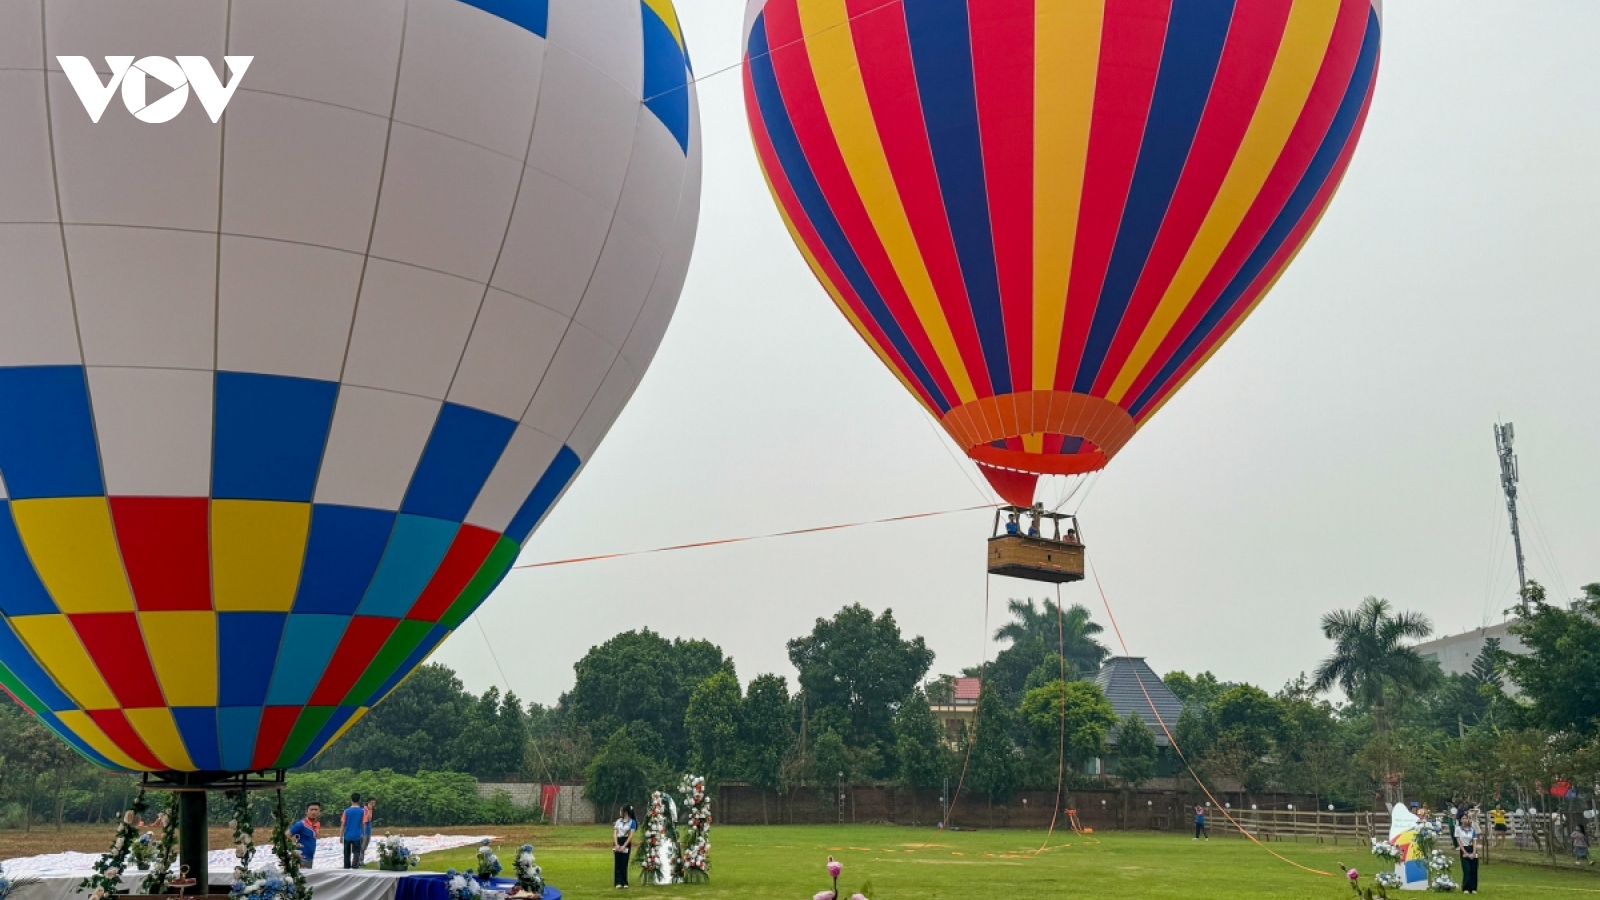 Sightseeing tour on hot air balloon launched